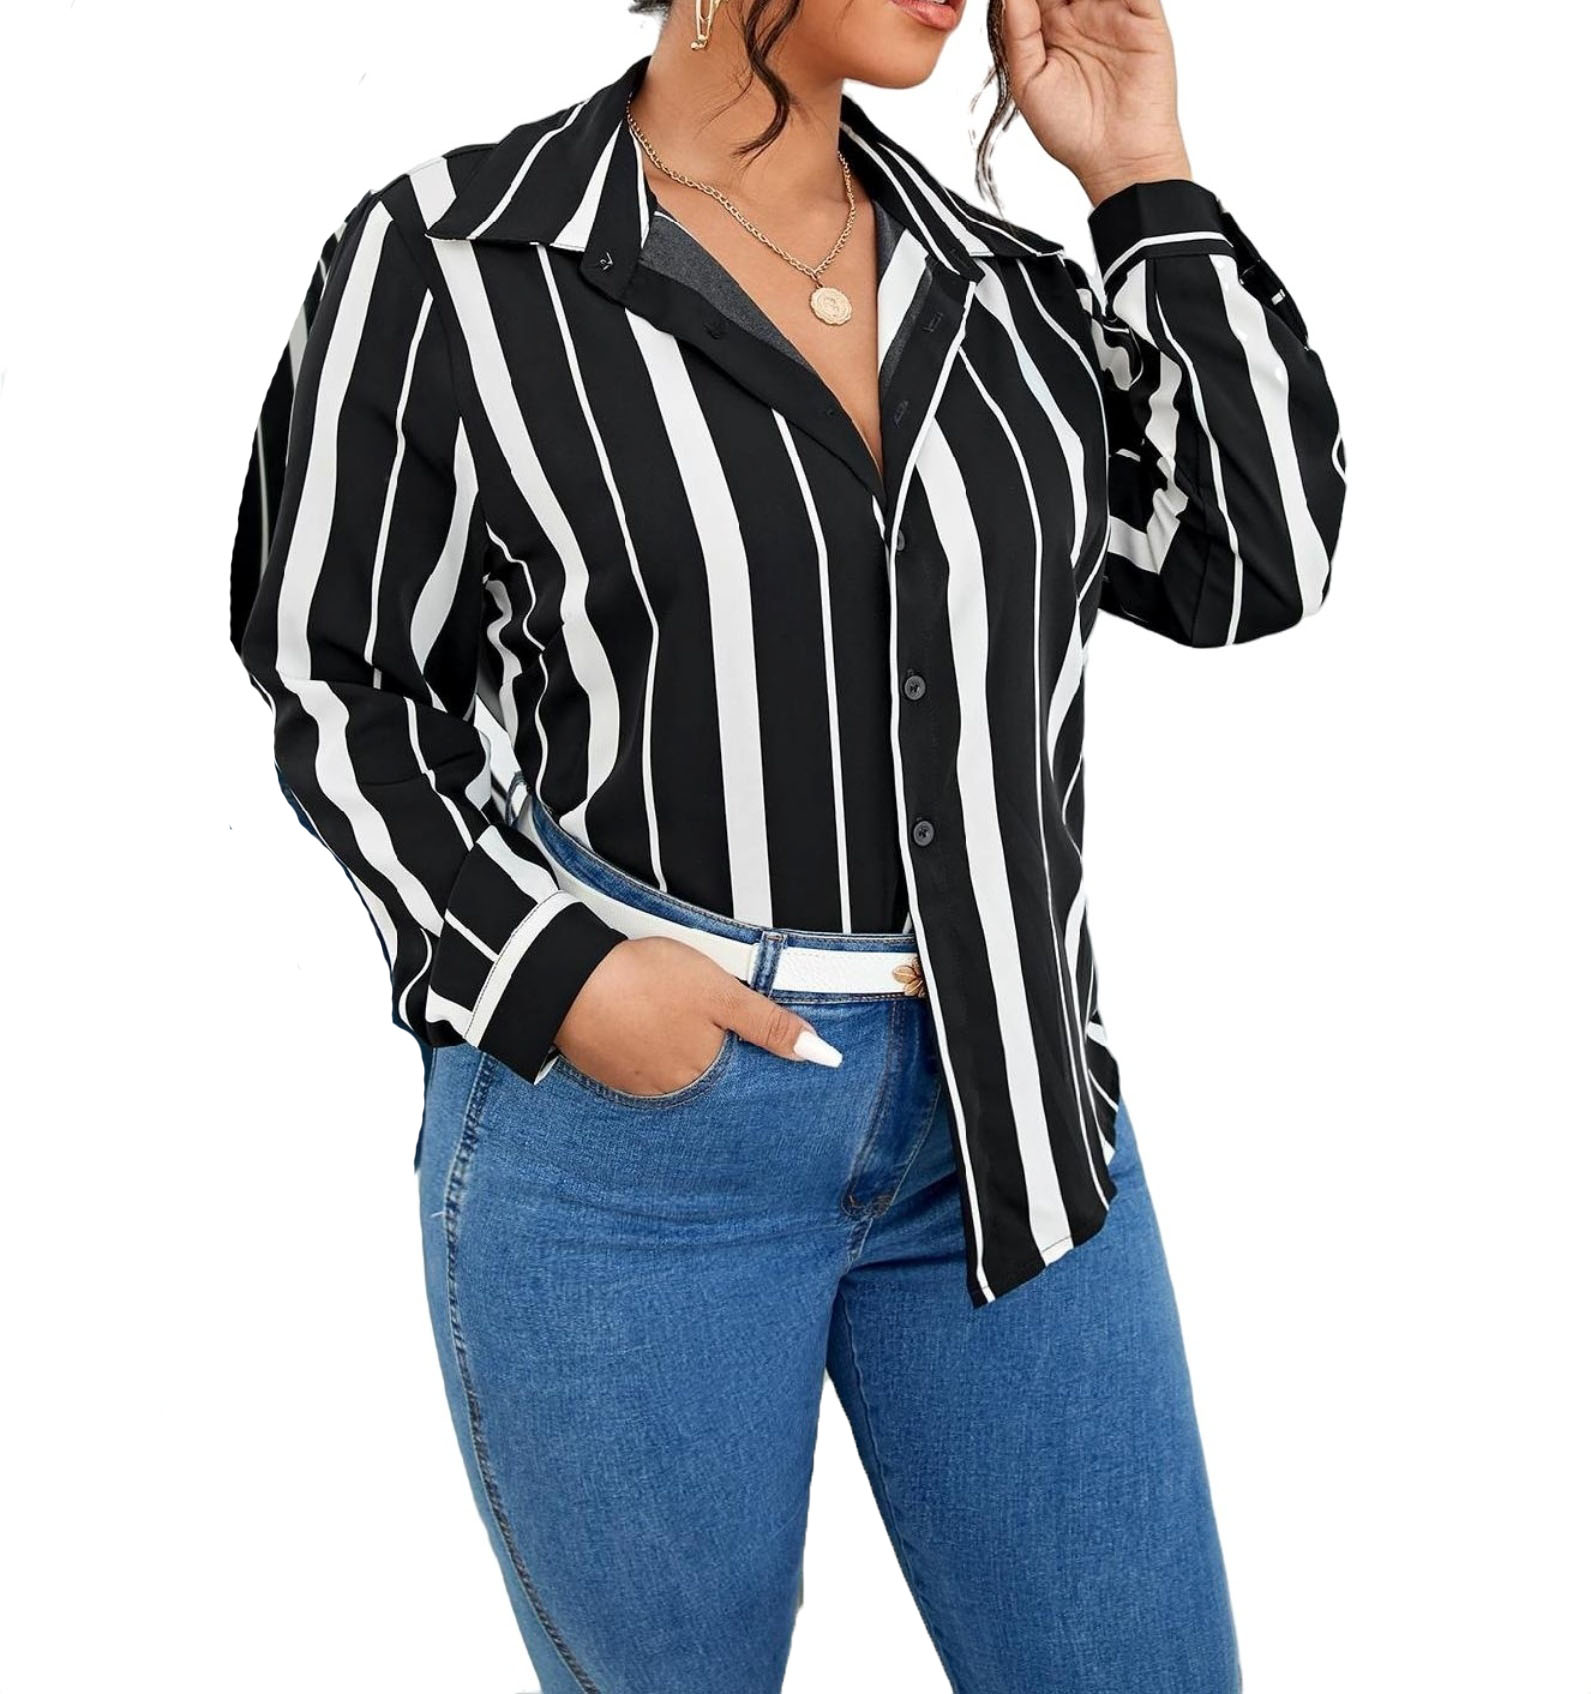 Casual Striped Print Collar Shirt Long Sleeve Black and White Plus Size ...